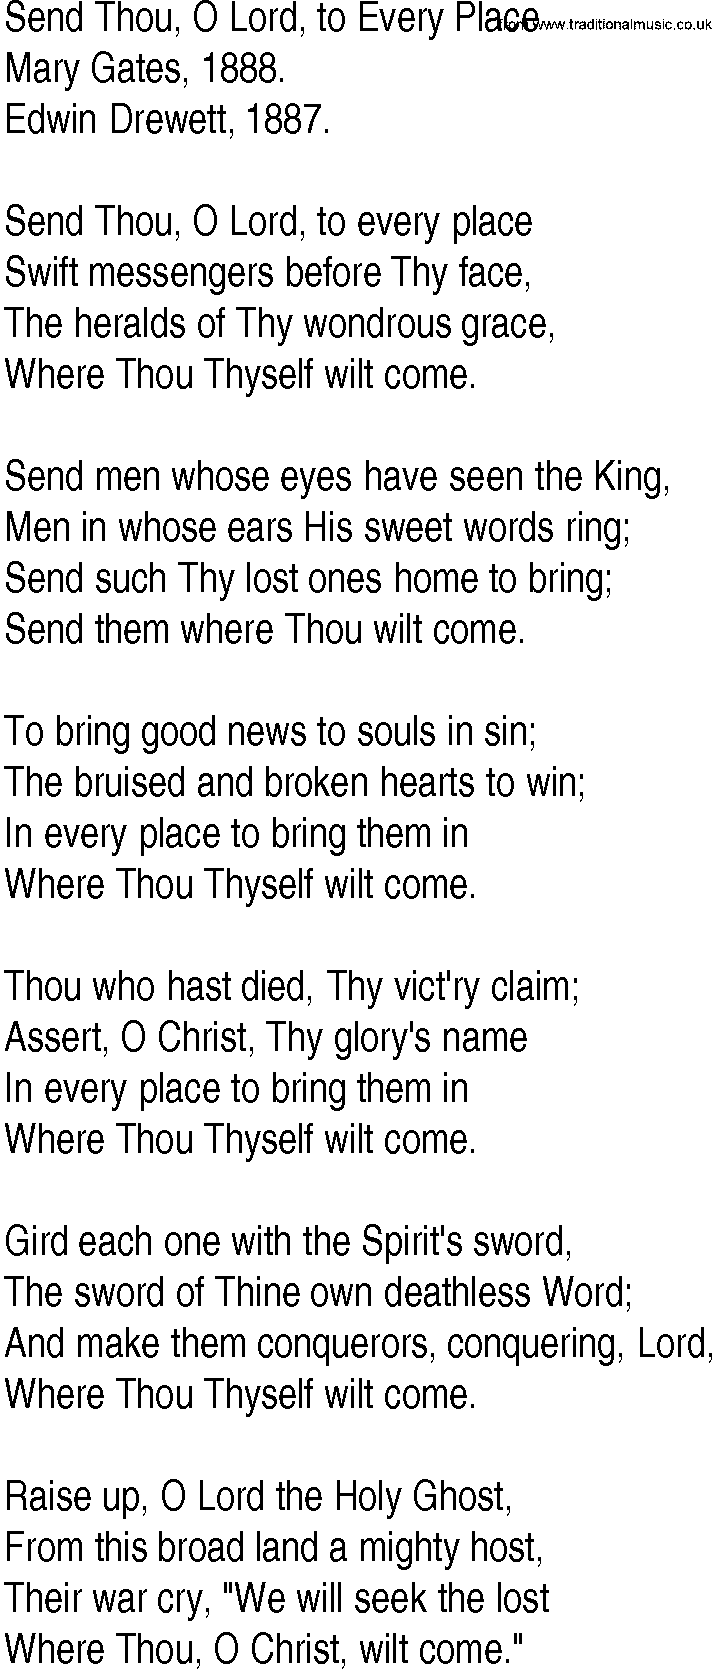 Hymn and Gospel Song: Send Thou, O Lord, to Every Place by Mary Gates lyrics